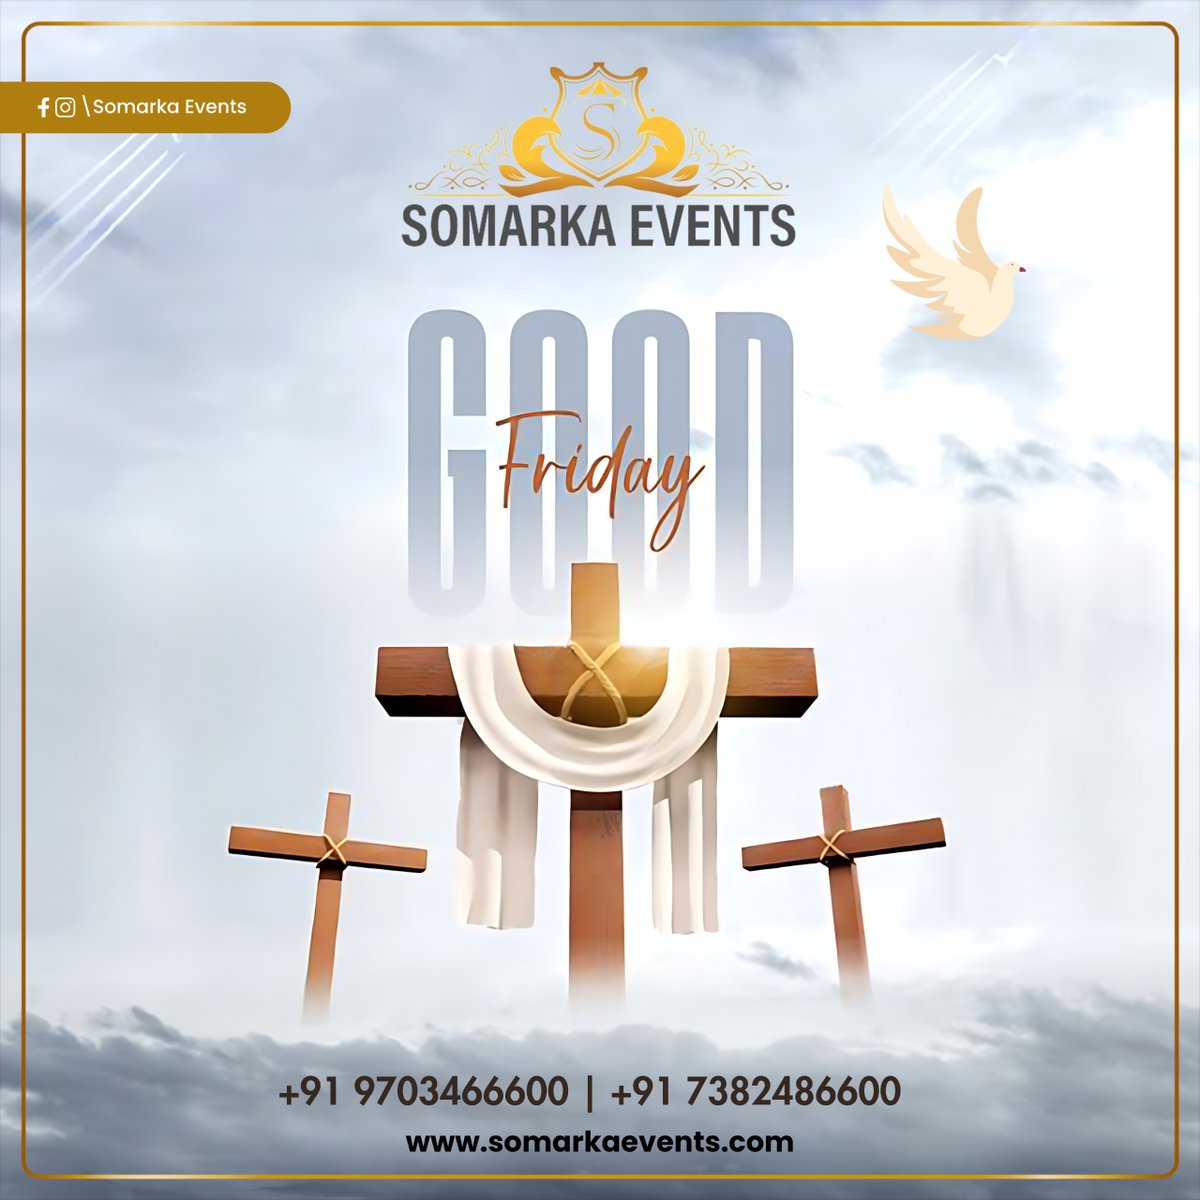 On Good Friday, we pause to remember the depth of sacrifice, the weight of redemption, and the power of love that transcends all suffering.

📞 Contact Numbers: +91 97034 66600 | +91 73824 86600

#SomarkaEvents #GoodFriday #BestEventDesigners #BestEventOrganisation